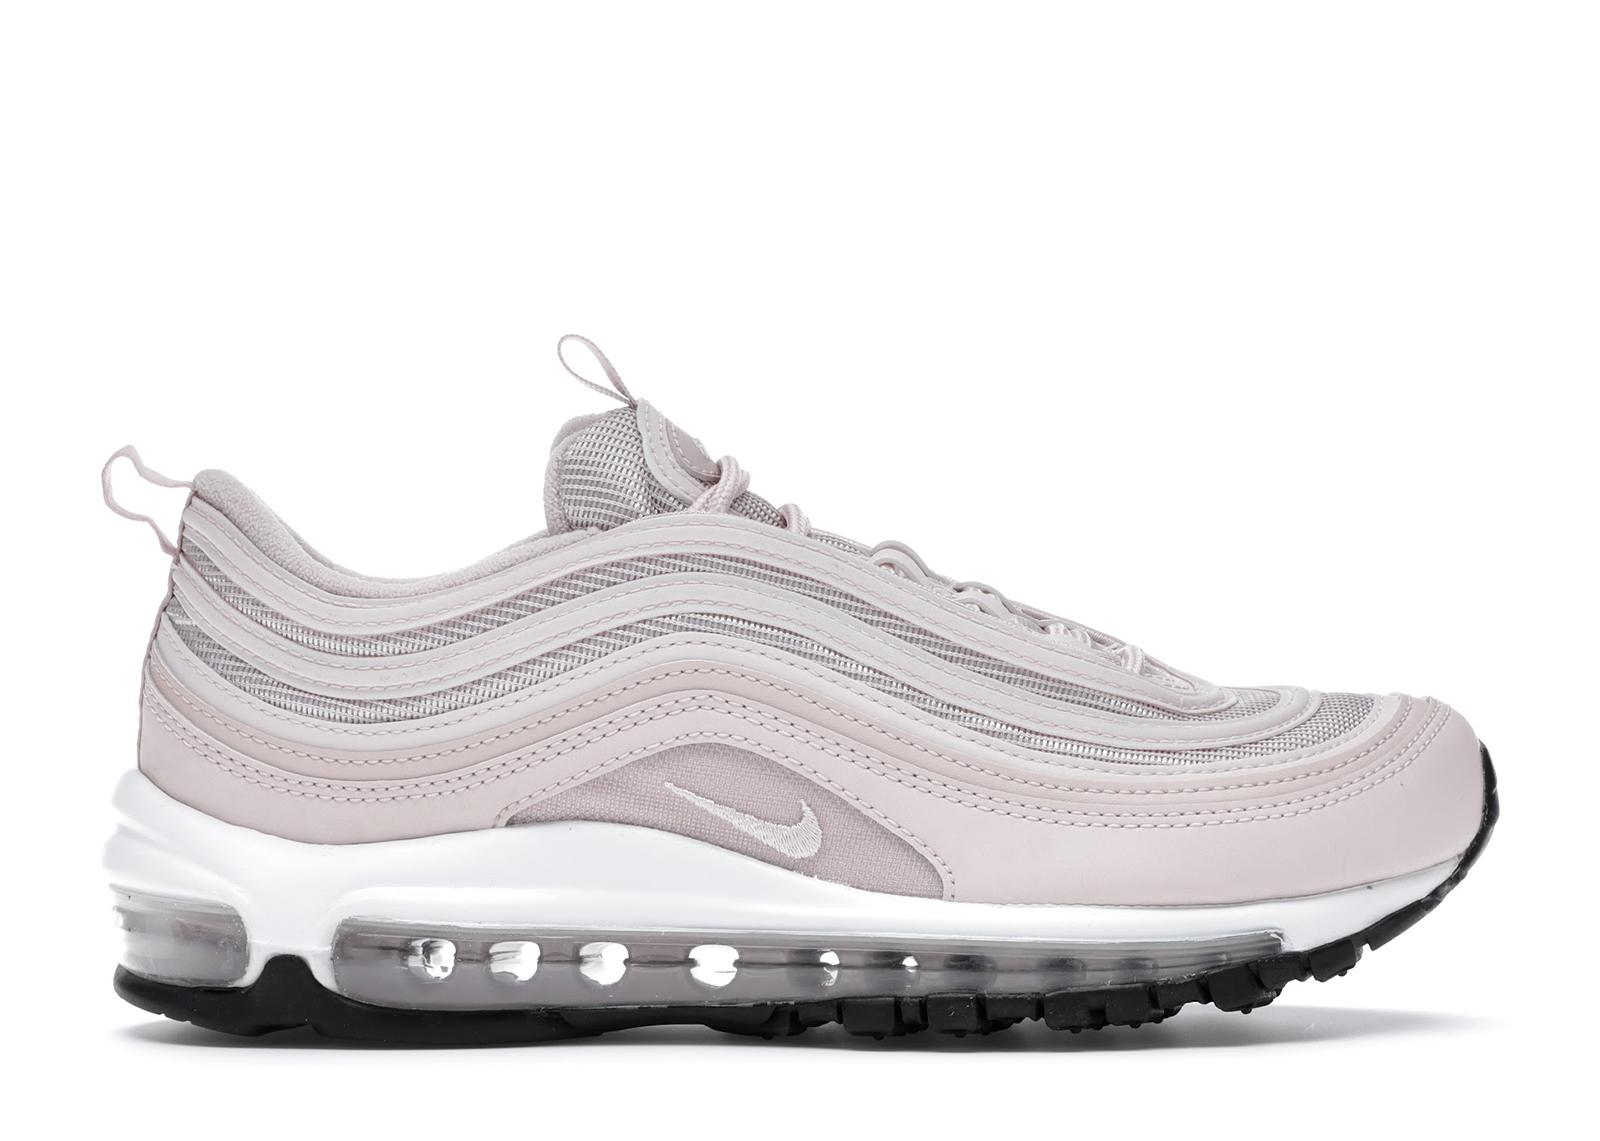 Nike Air Max 97 Barely Rose Black Sole 